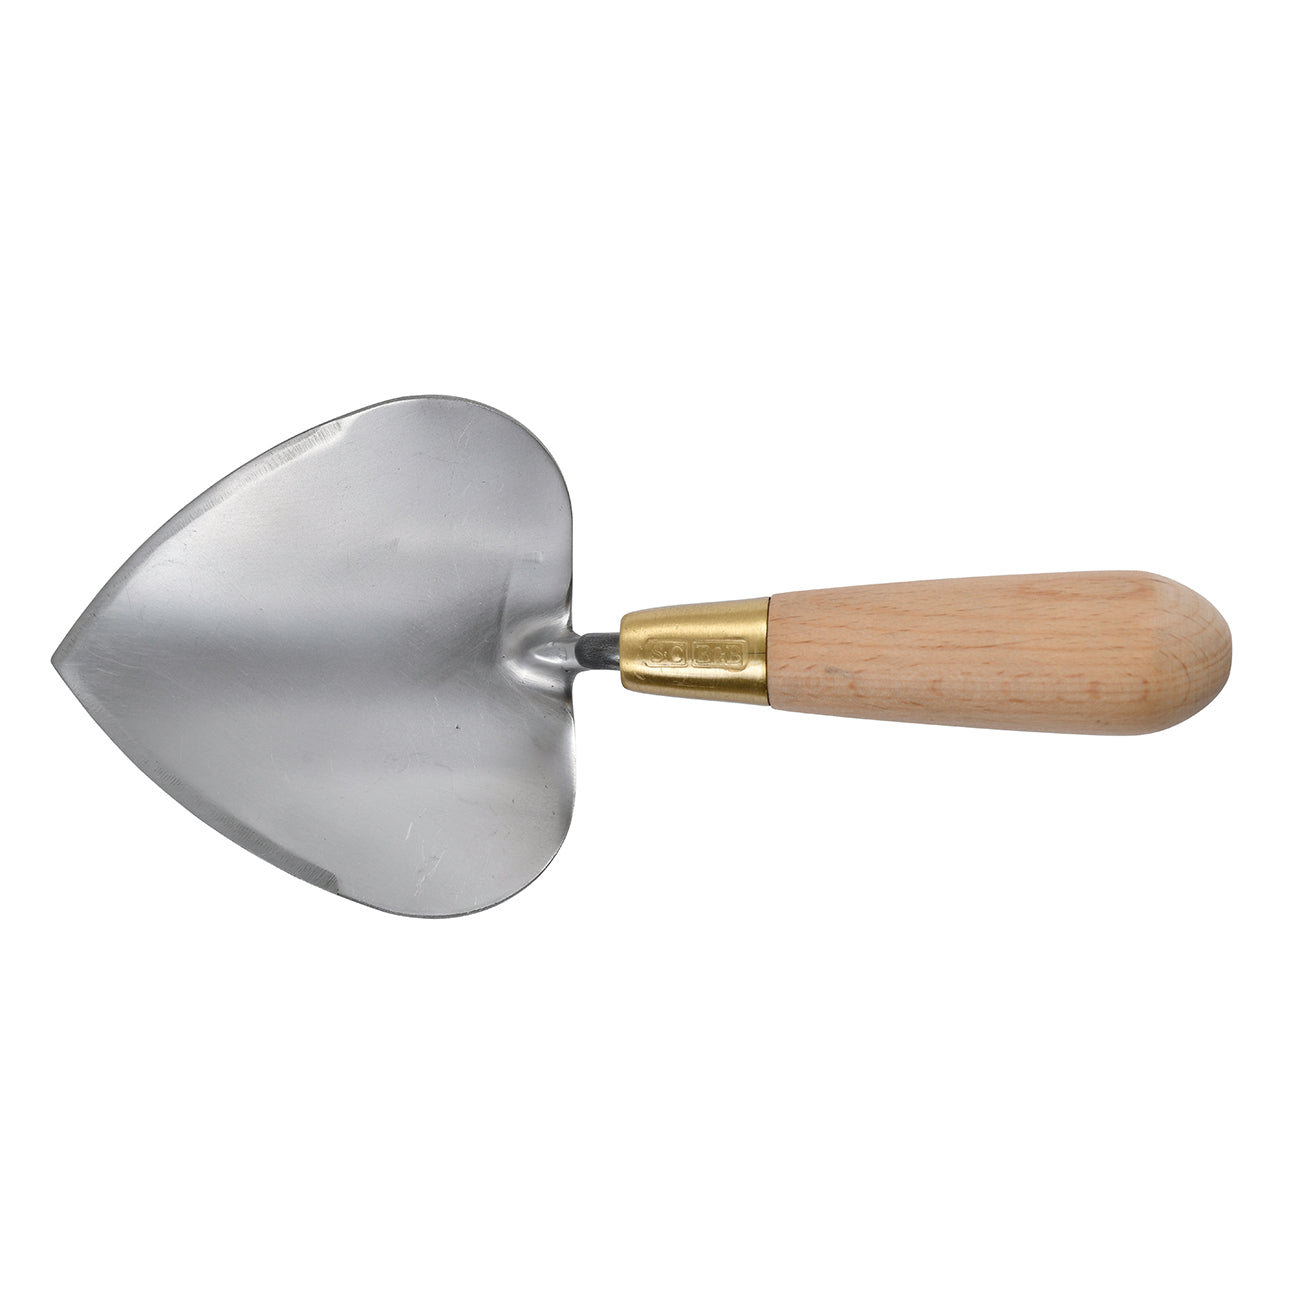 Ideal Trowel for Planting